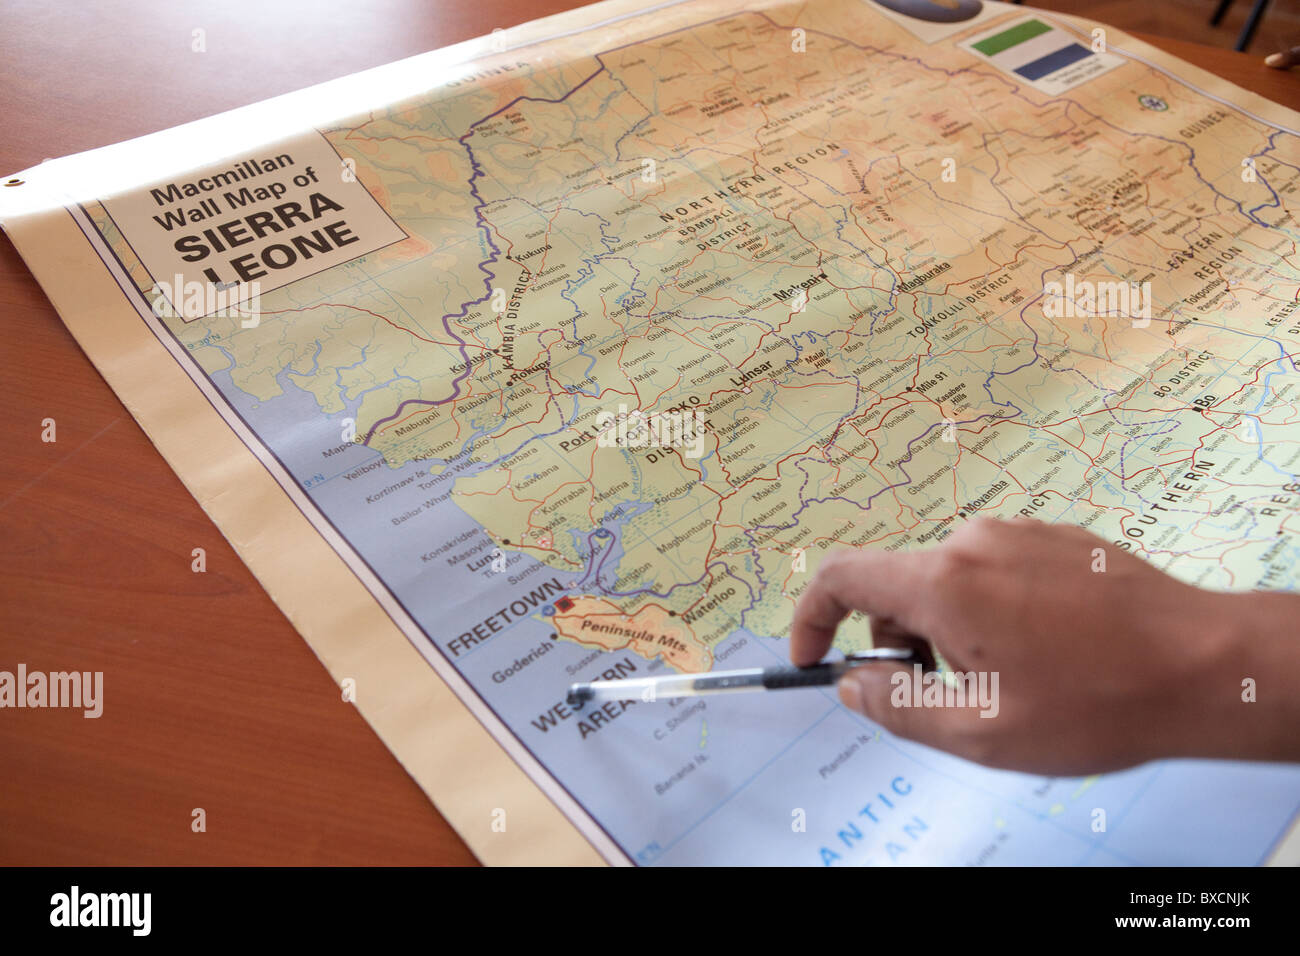 A man points to points on a map of Sierra Leone, West Africa. Stock Photo